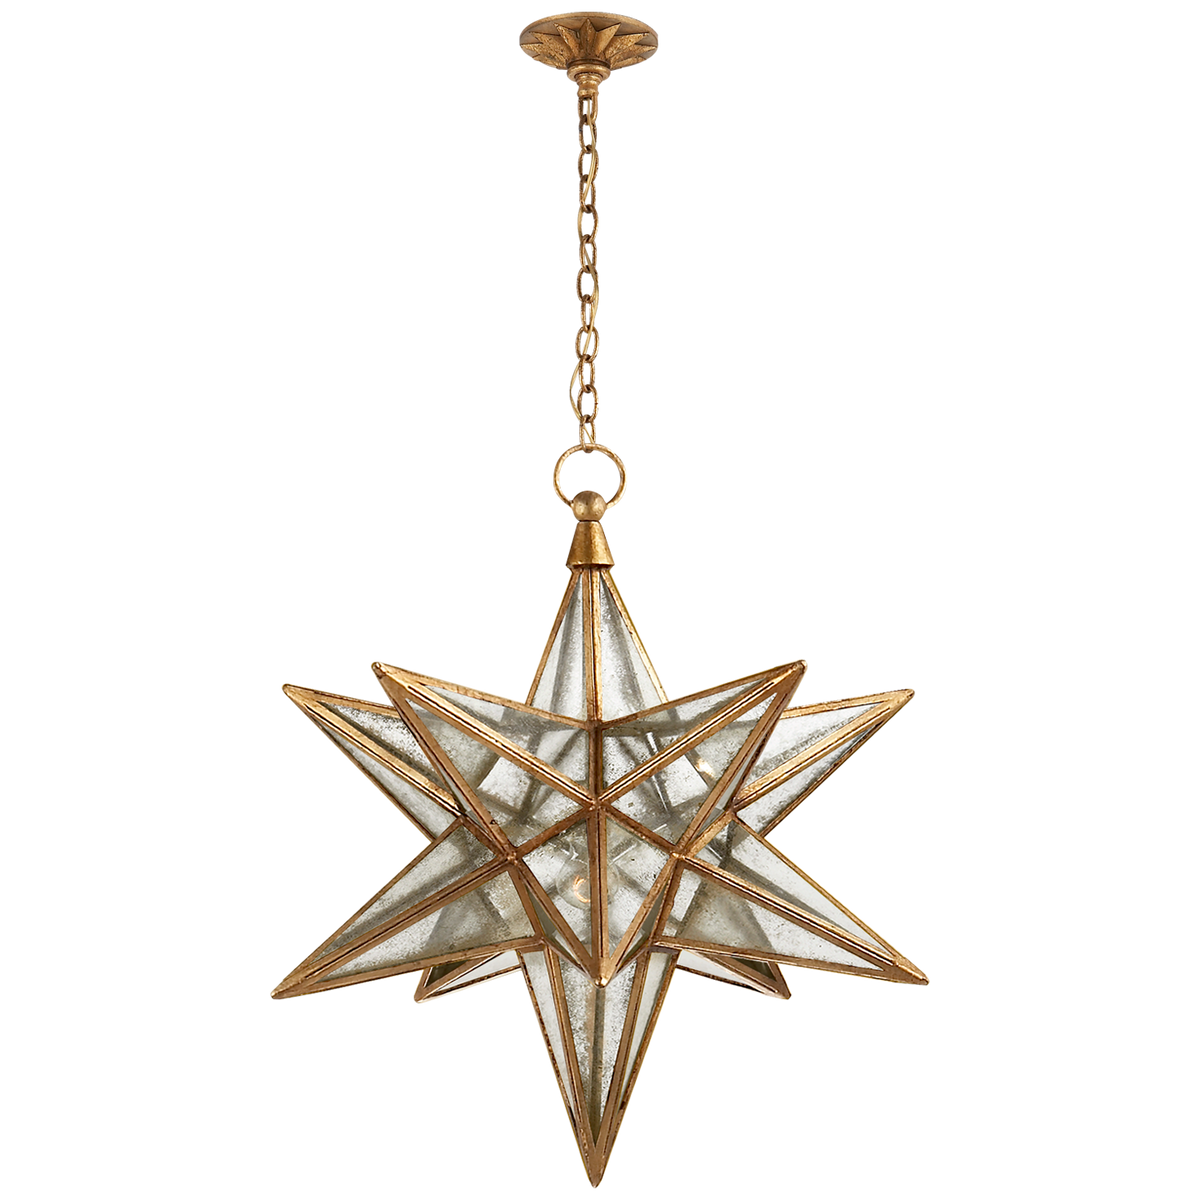 Moravian Star Lantern Large - Gilded Iron with Antique Mirror